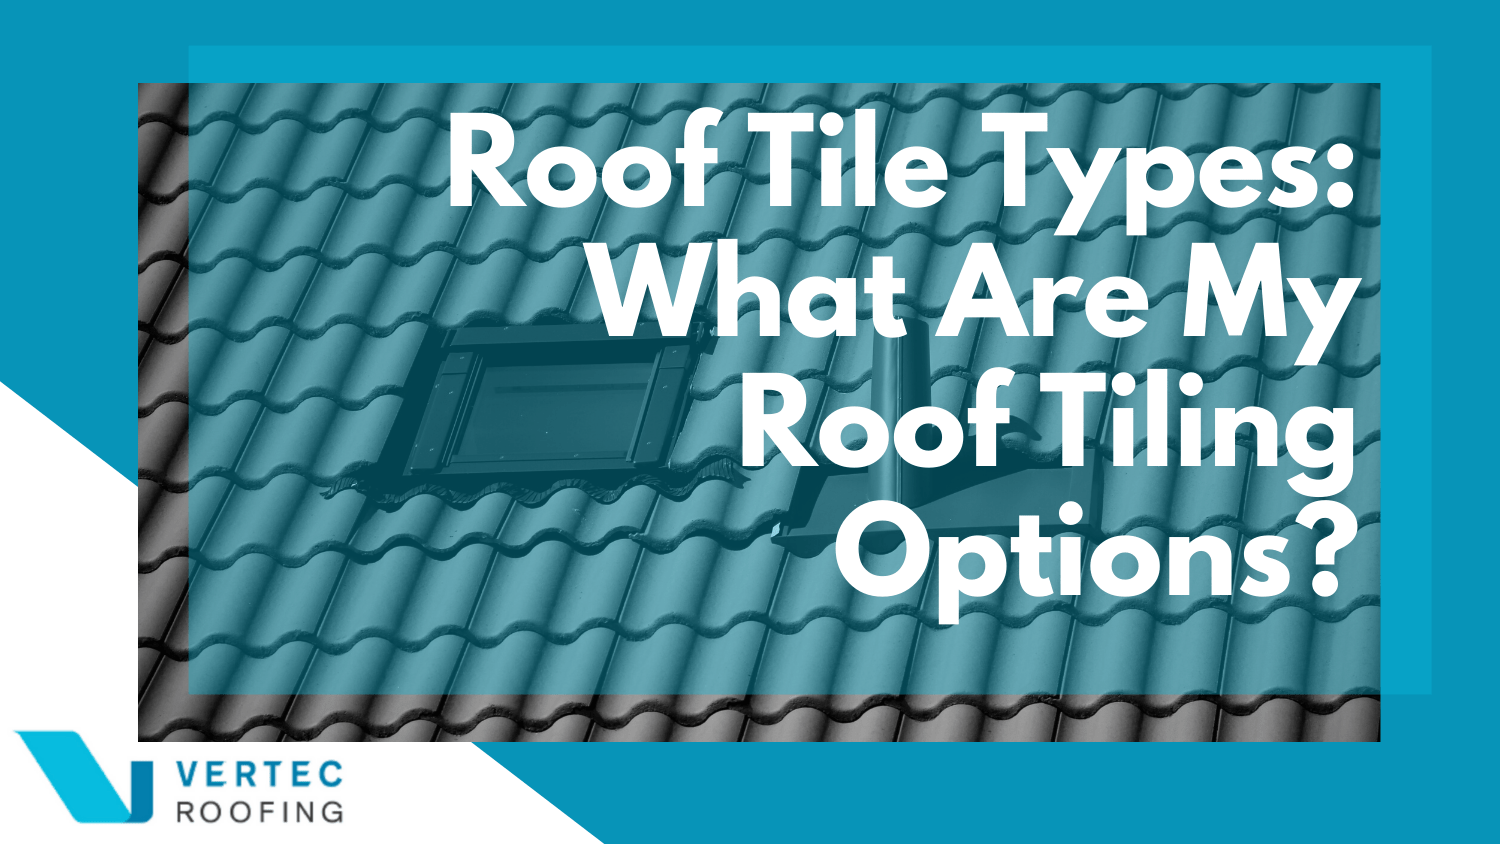 What Are My Roof Tiling Options?